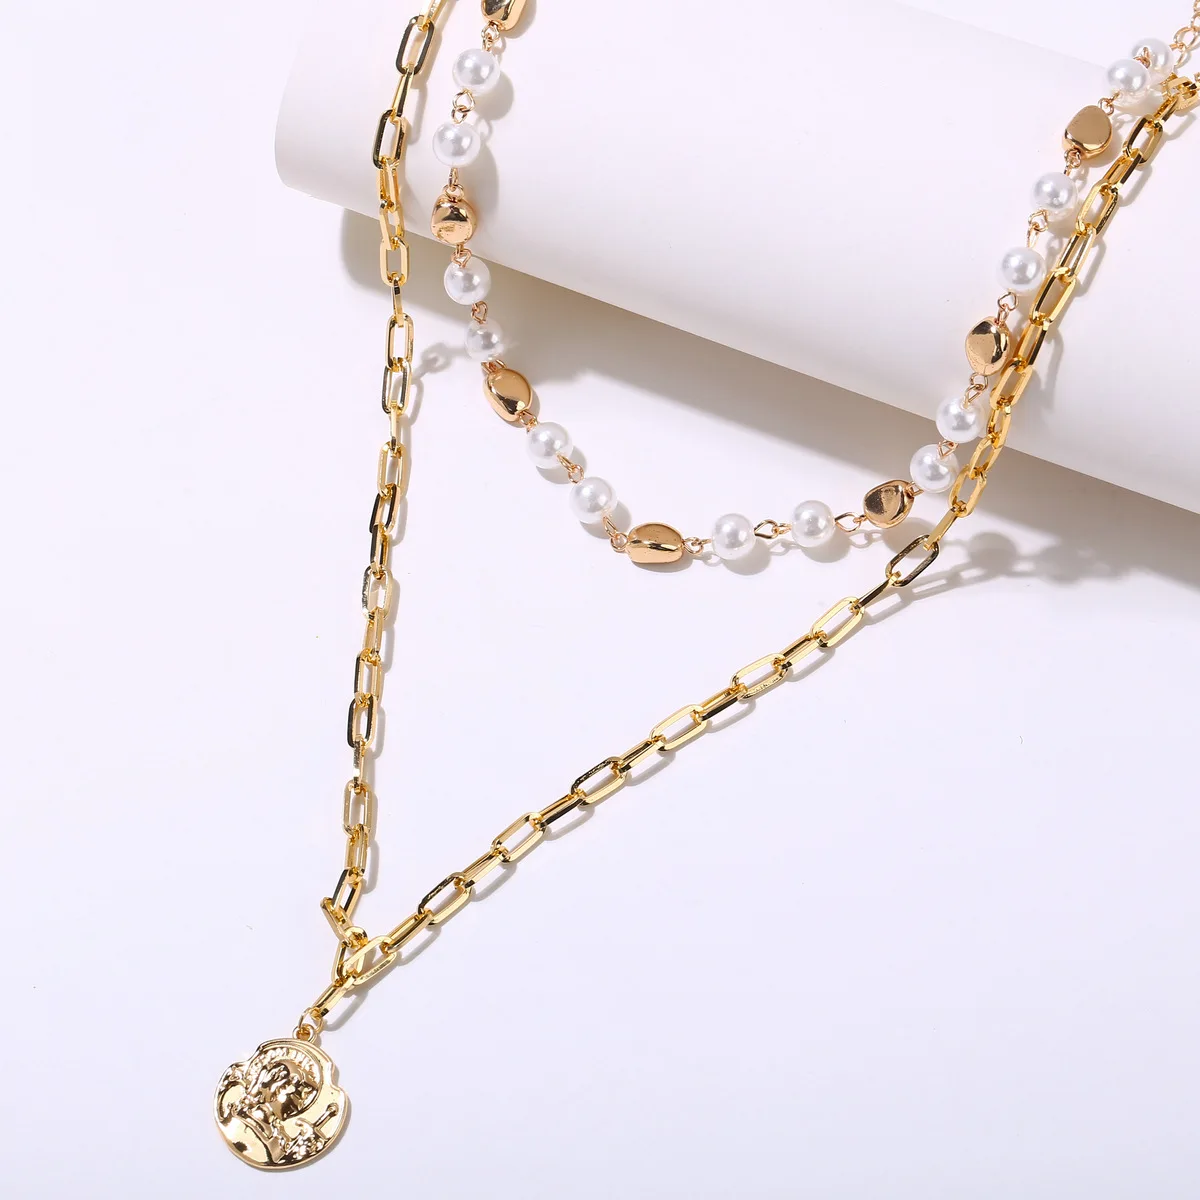 DIEZI Luxury New Design Imitation Pearl Choker Necklace Female Coin Pendant Necklaces for Women Gold Color Fashion Jewelry